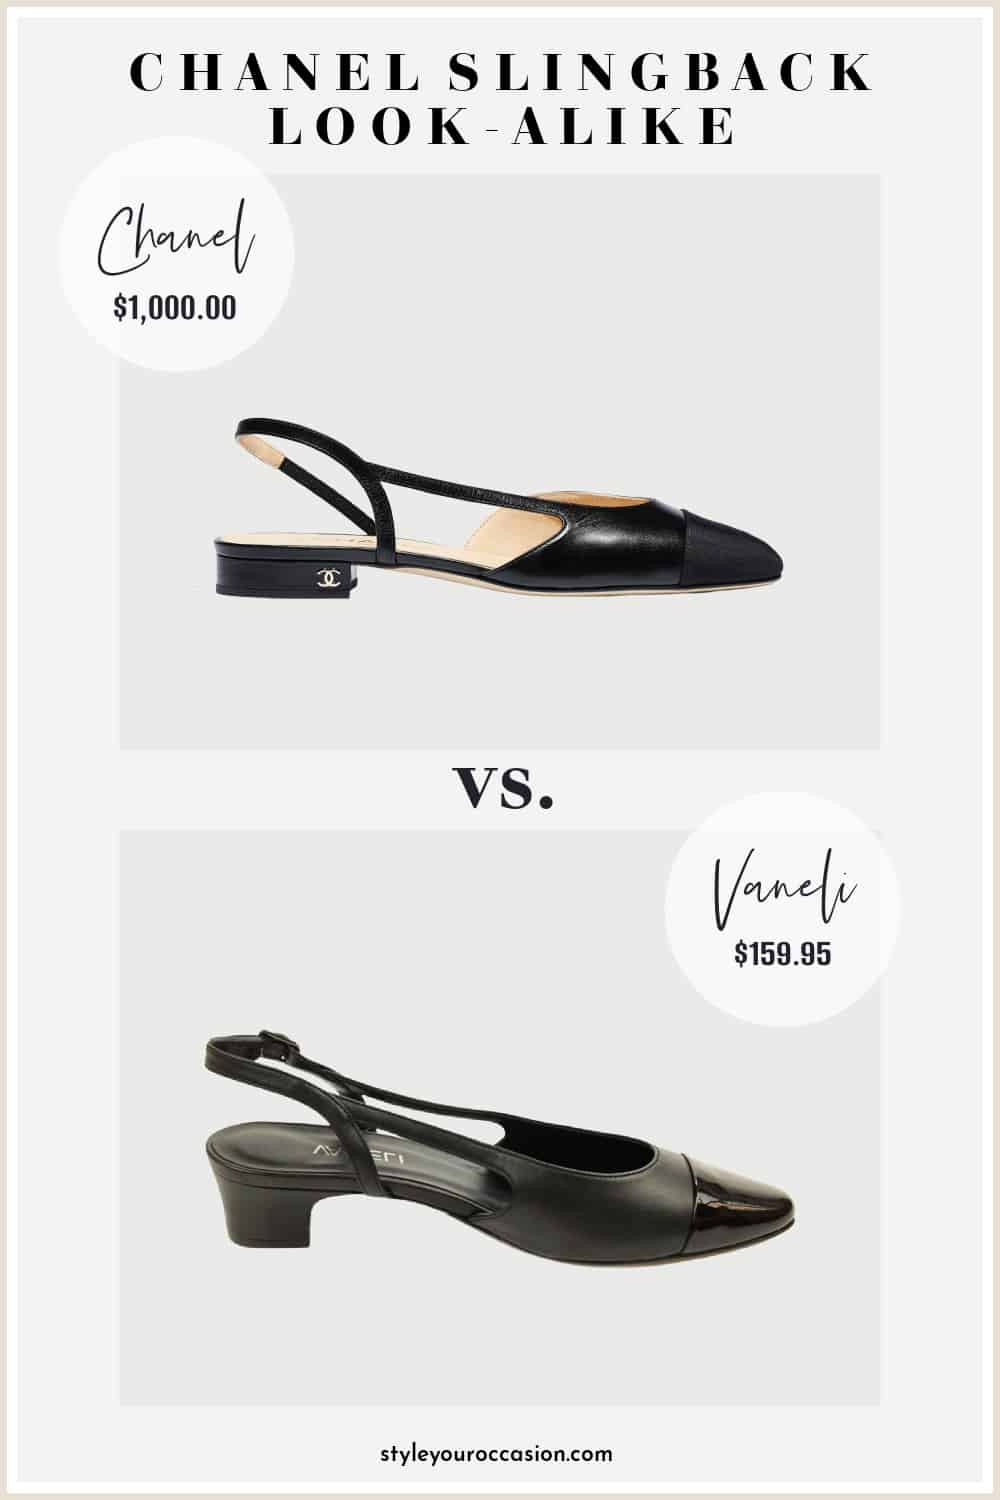 image comparing a low black Chanel slingback pump with a look-alike shoe